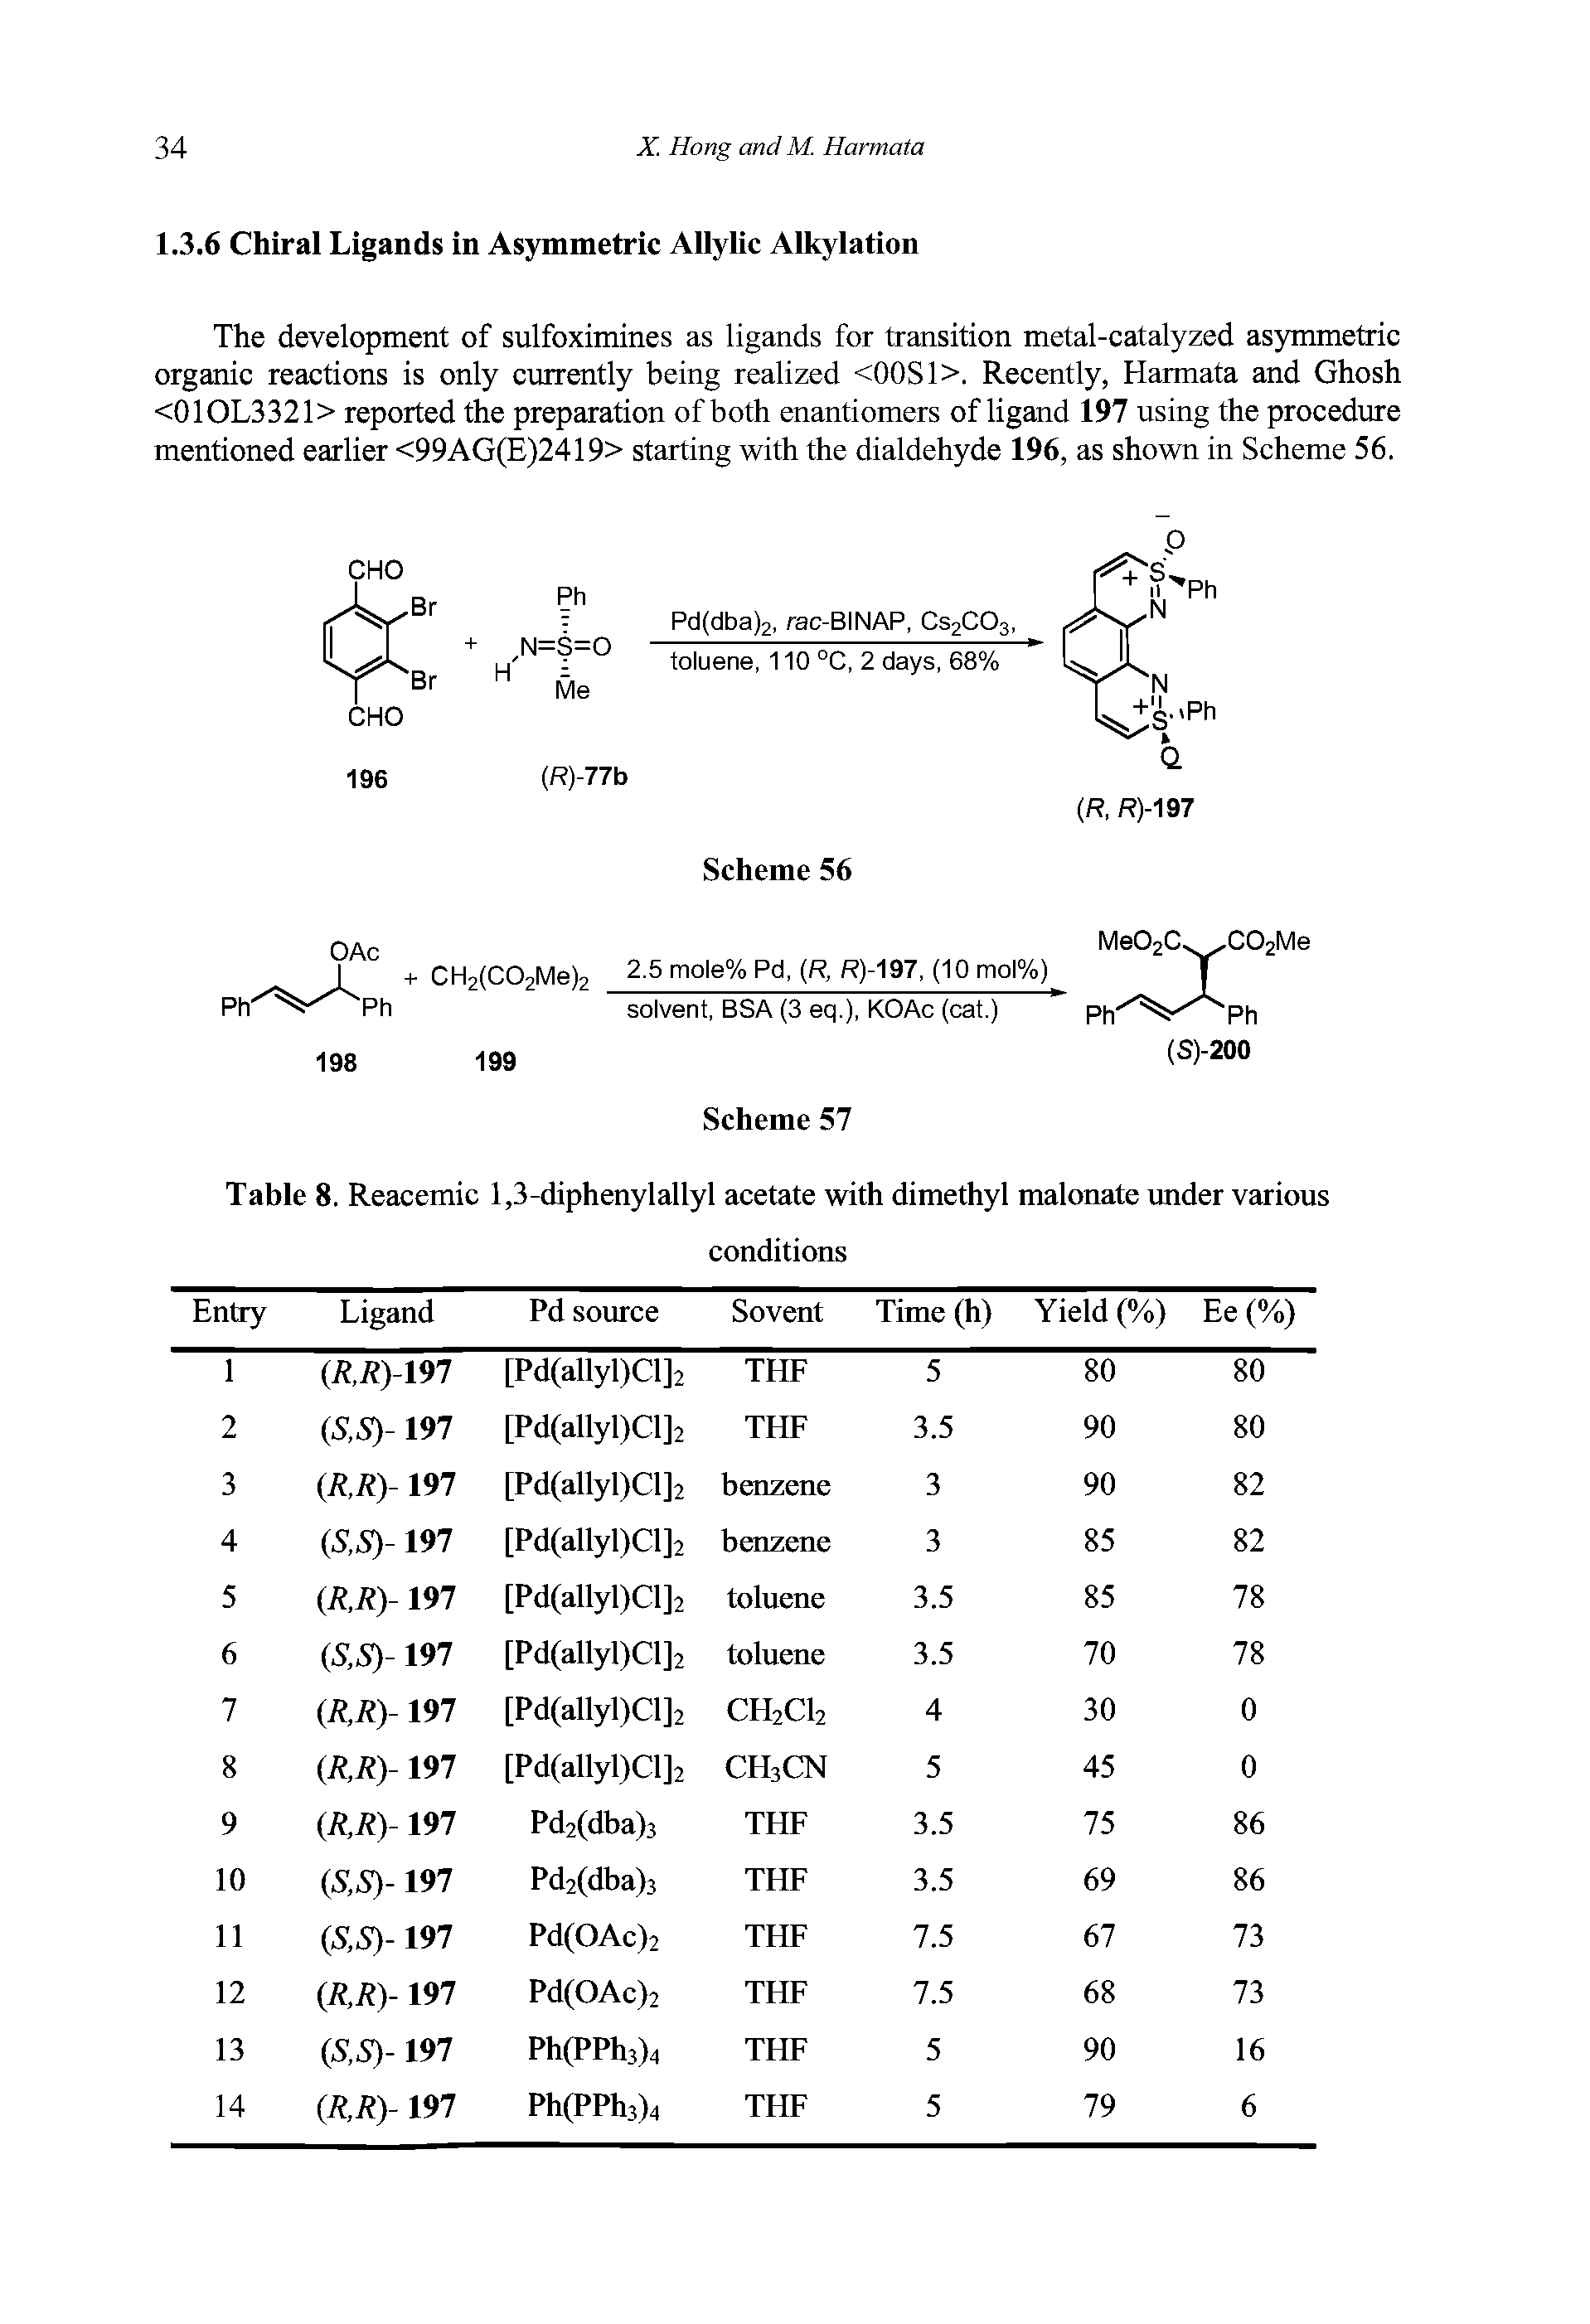 Table 8. Reacemic 1,3-diphenylallyl acetate with dimethyl malonate under various...